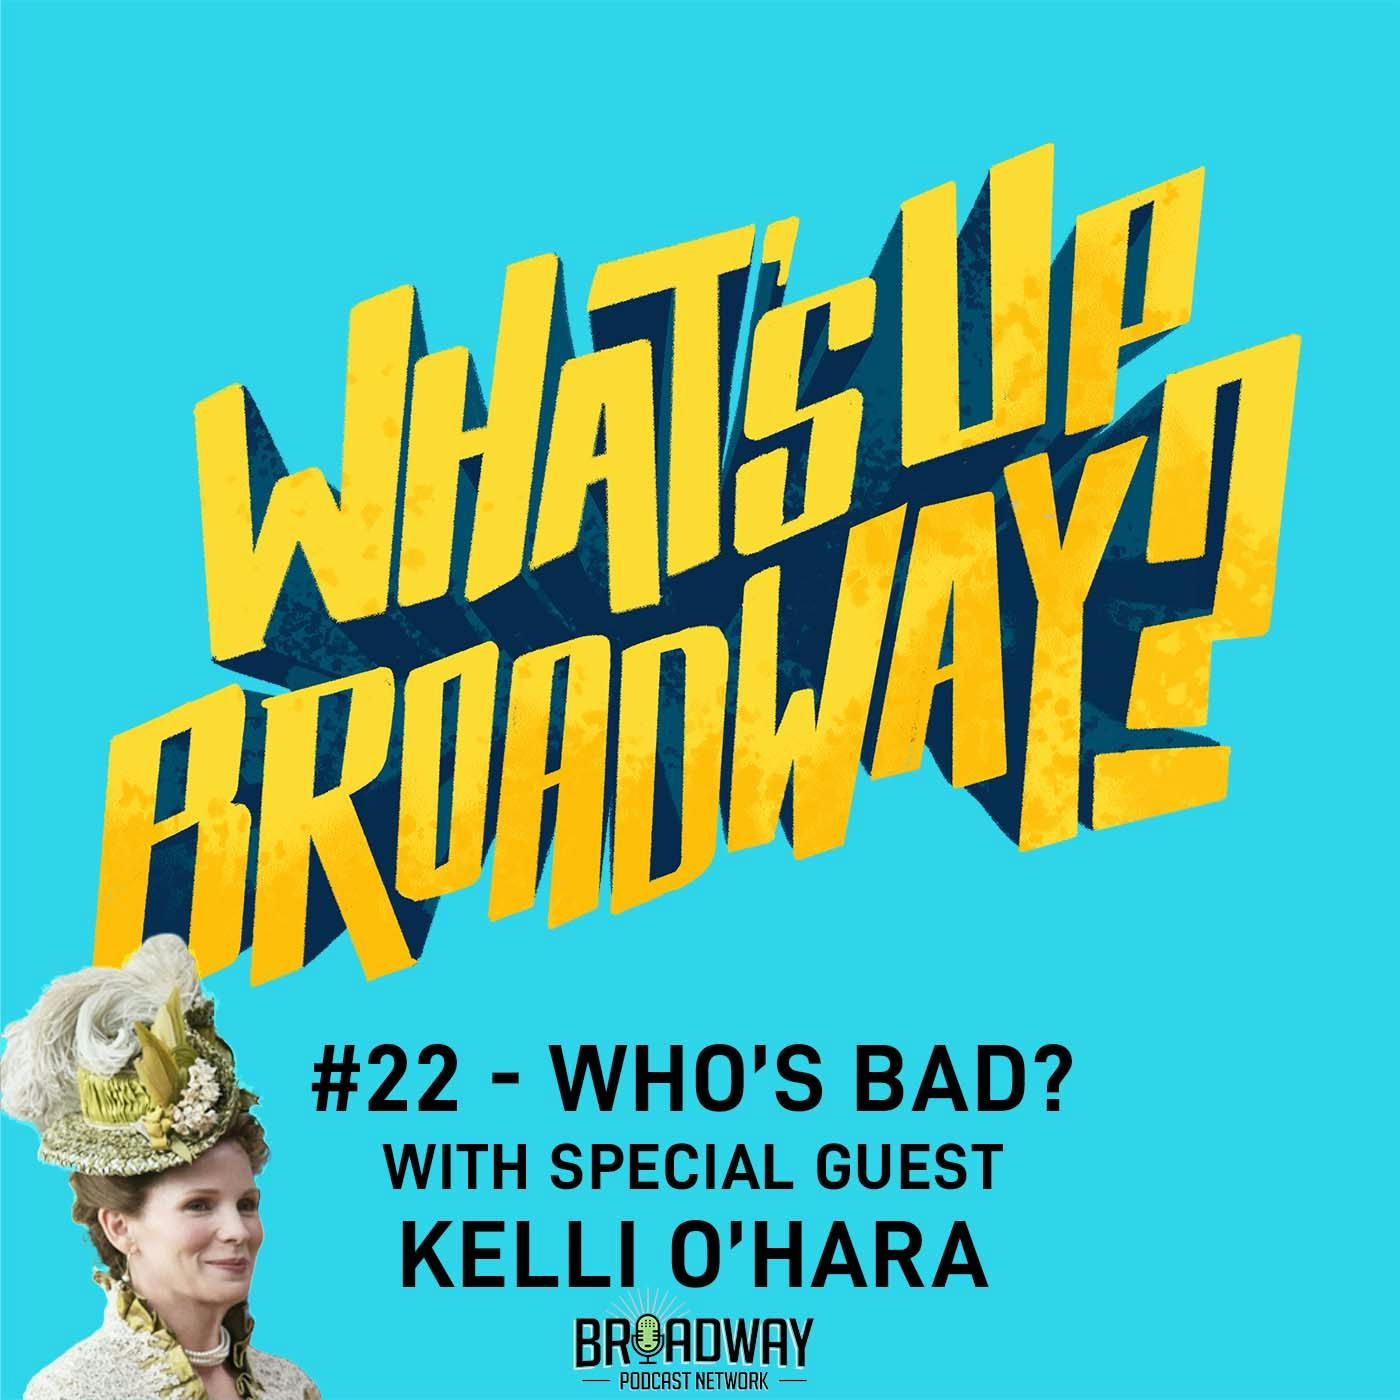 #22 - Who's Bad? with special guest Kelli O'Hara